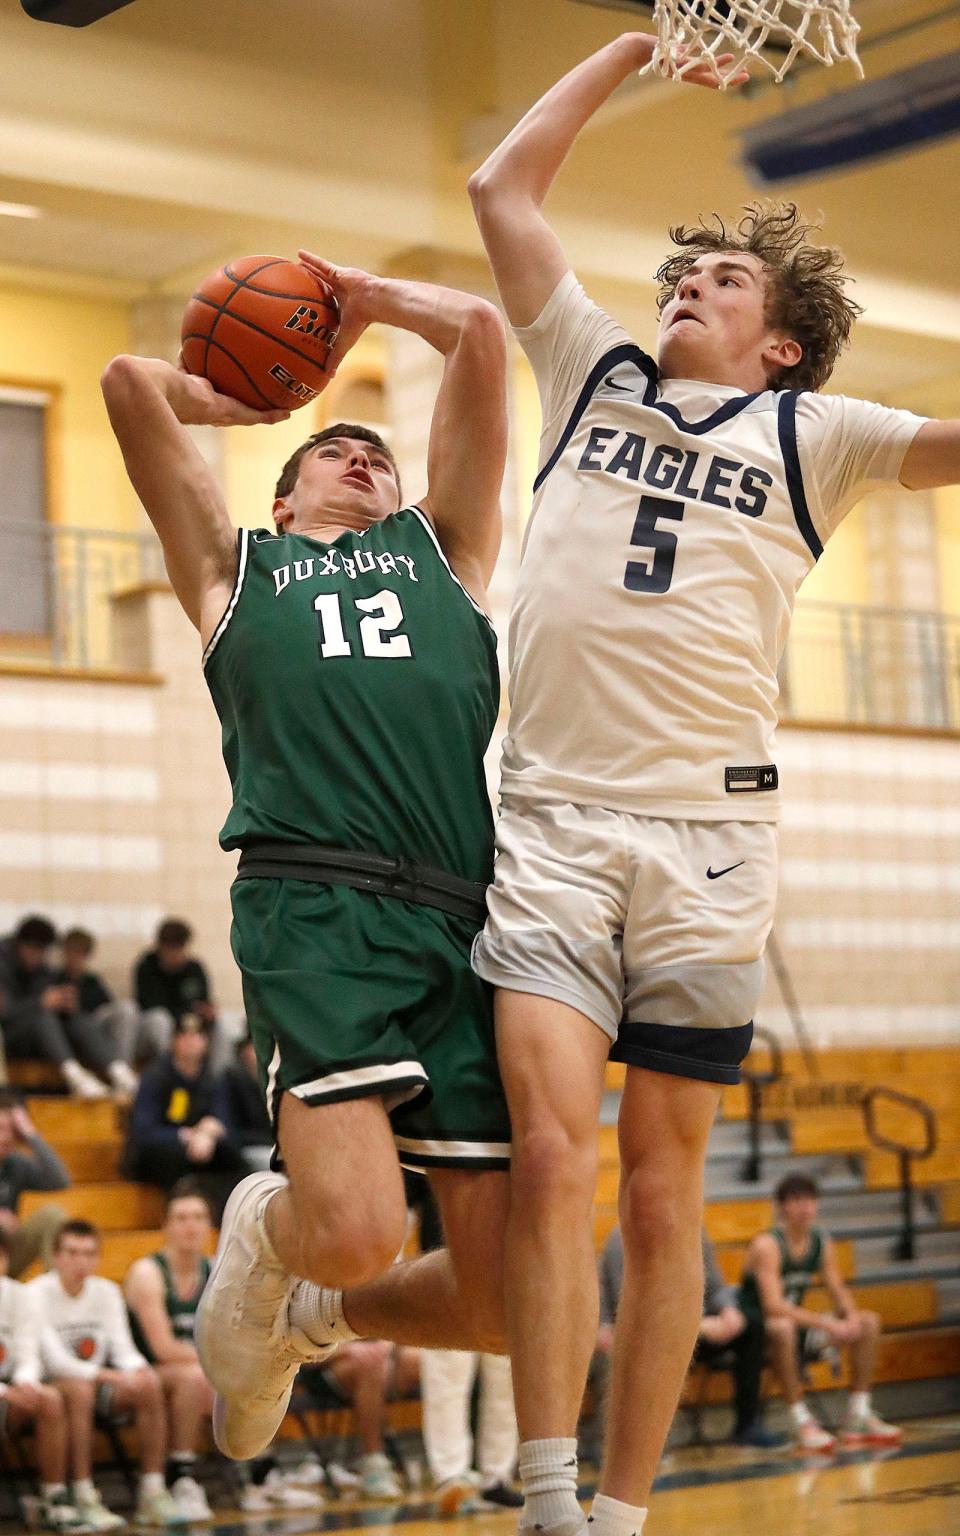 Zachary Falls of Duxbury lays up a shot under pressure from Eagle Nick Marcel.Plymouth North hosted Duxbury in boys basketball action on Friday February 3, 2023 